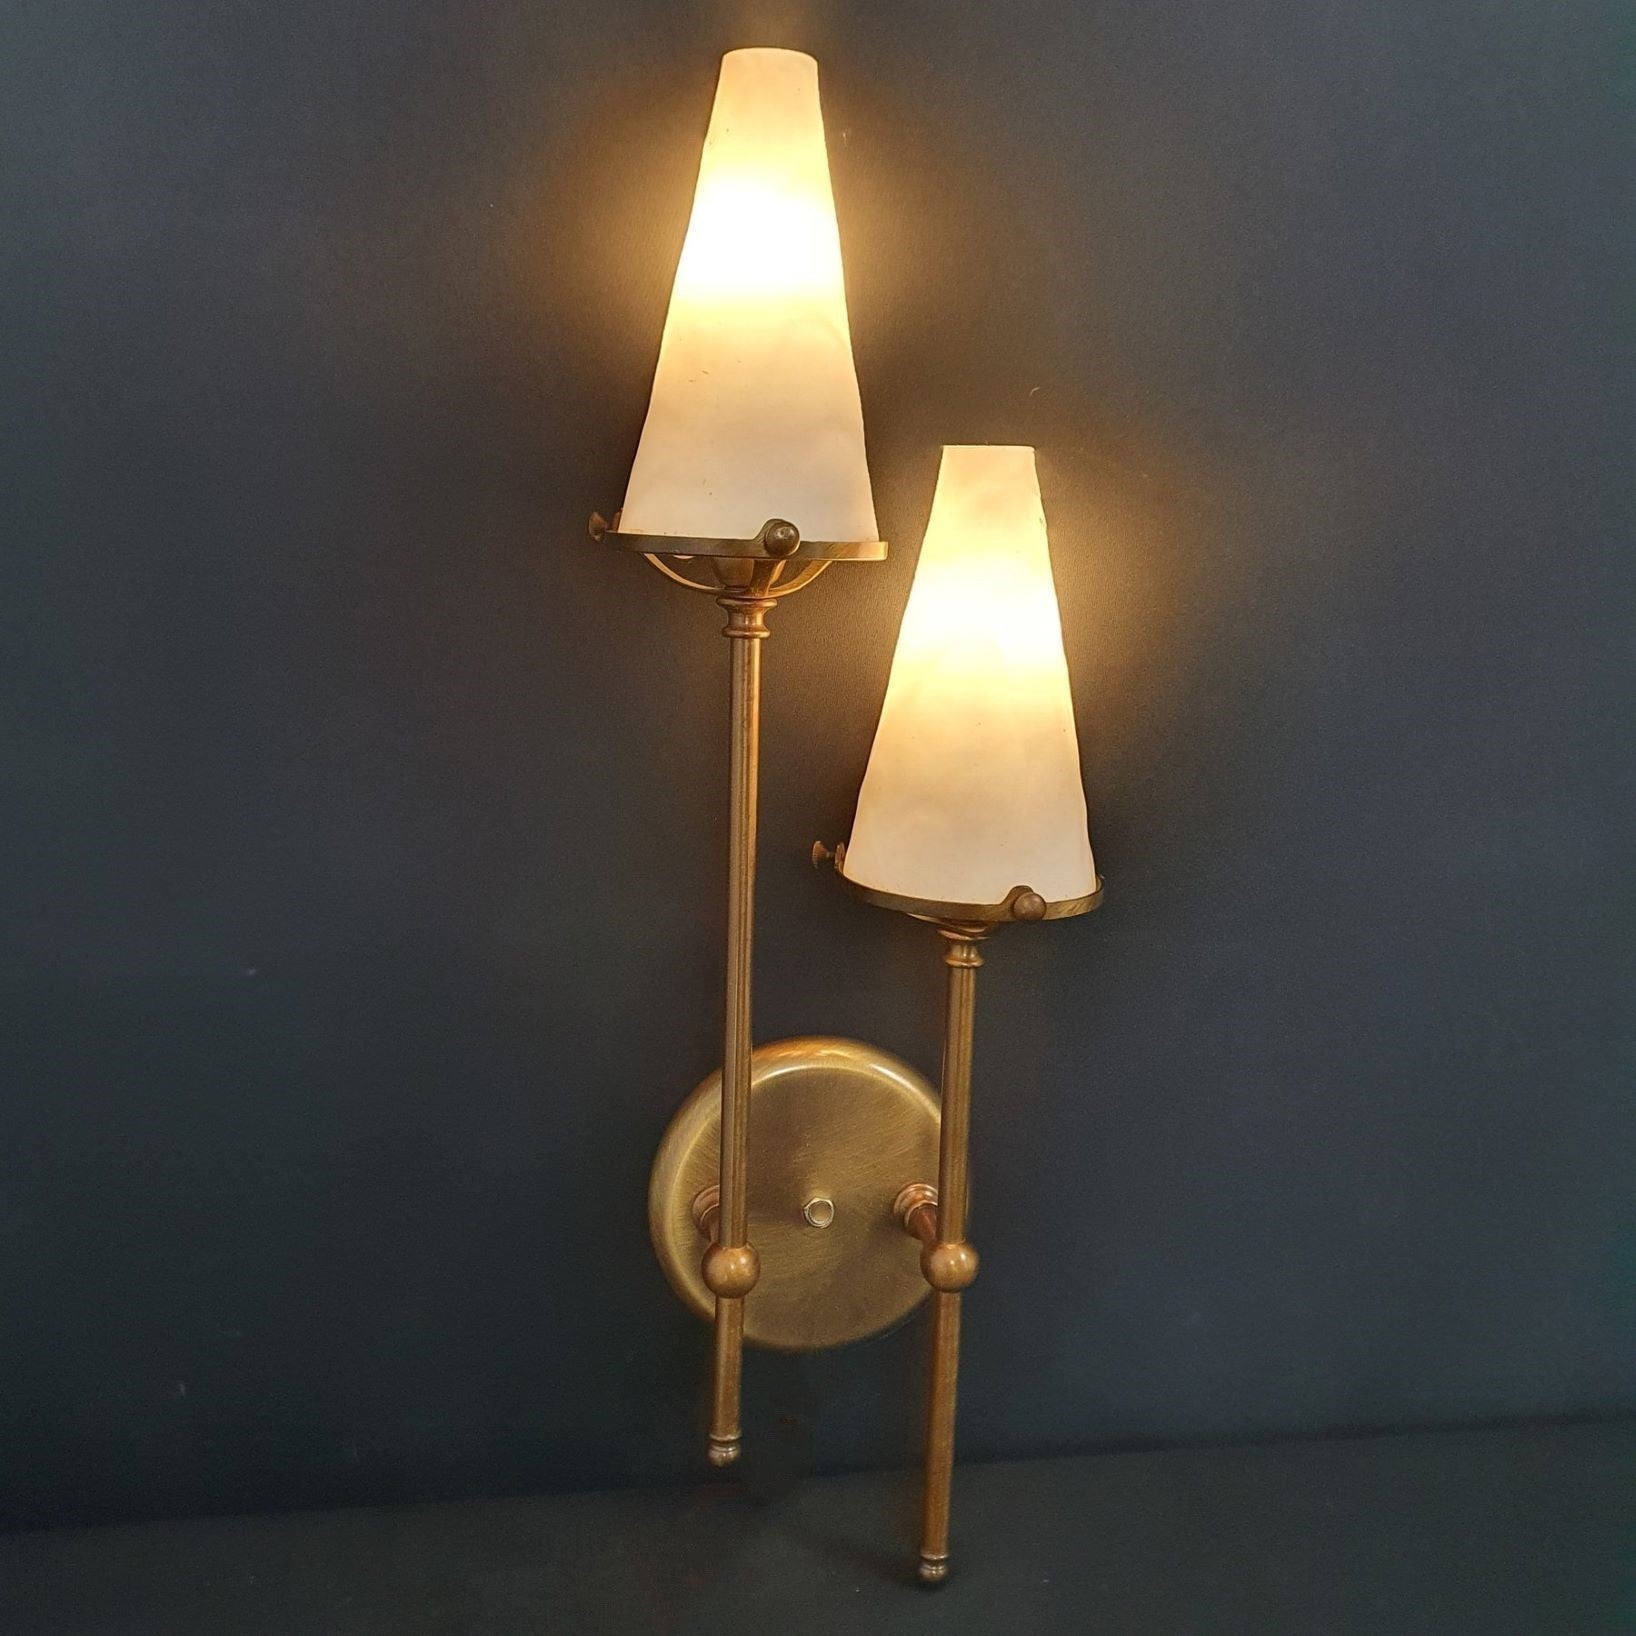 Maison Jansen Style Double Brass Glass Wall Sconce, Wall Light France, 1950s For Sale